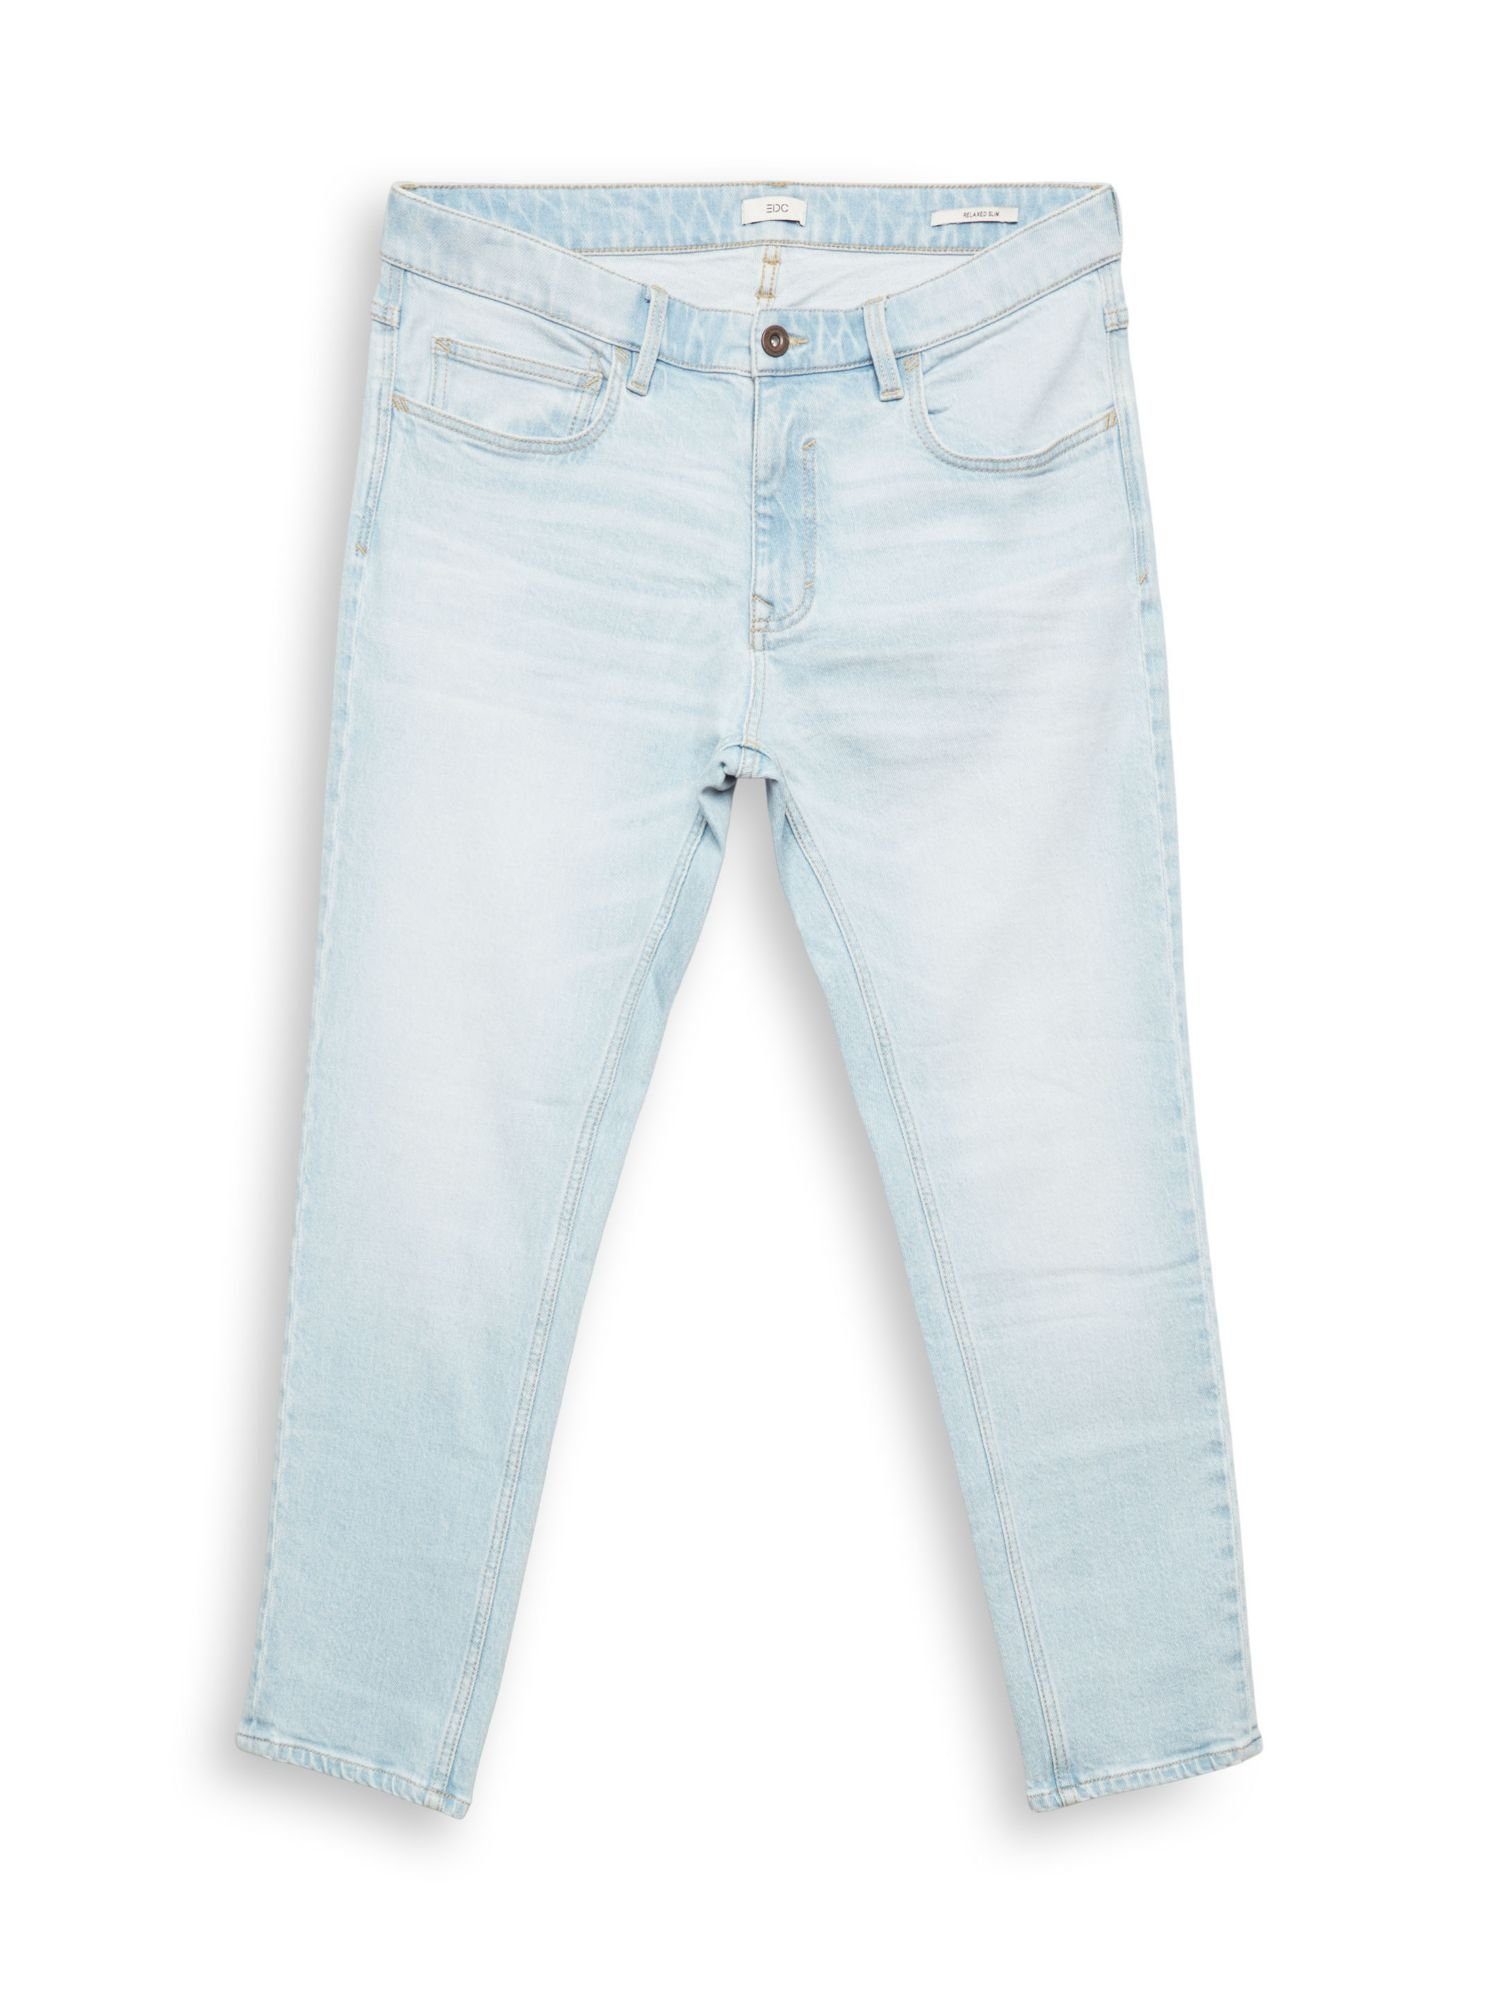 edc by Esprit Stretch-Jeans Stretch-Jeans BLUE BLEACHED